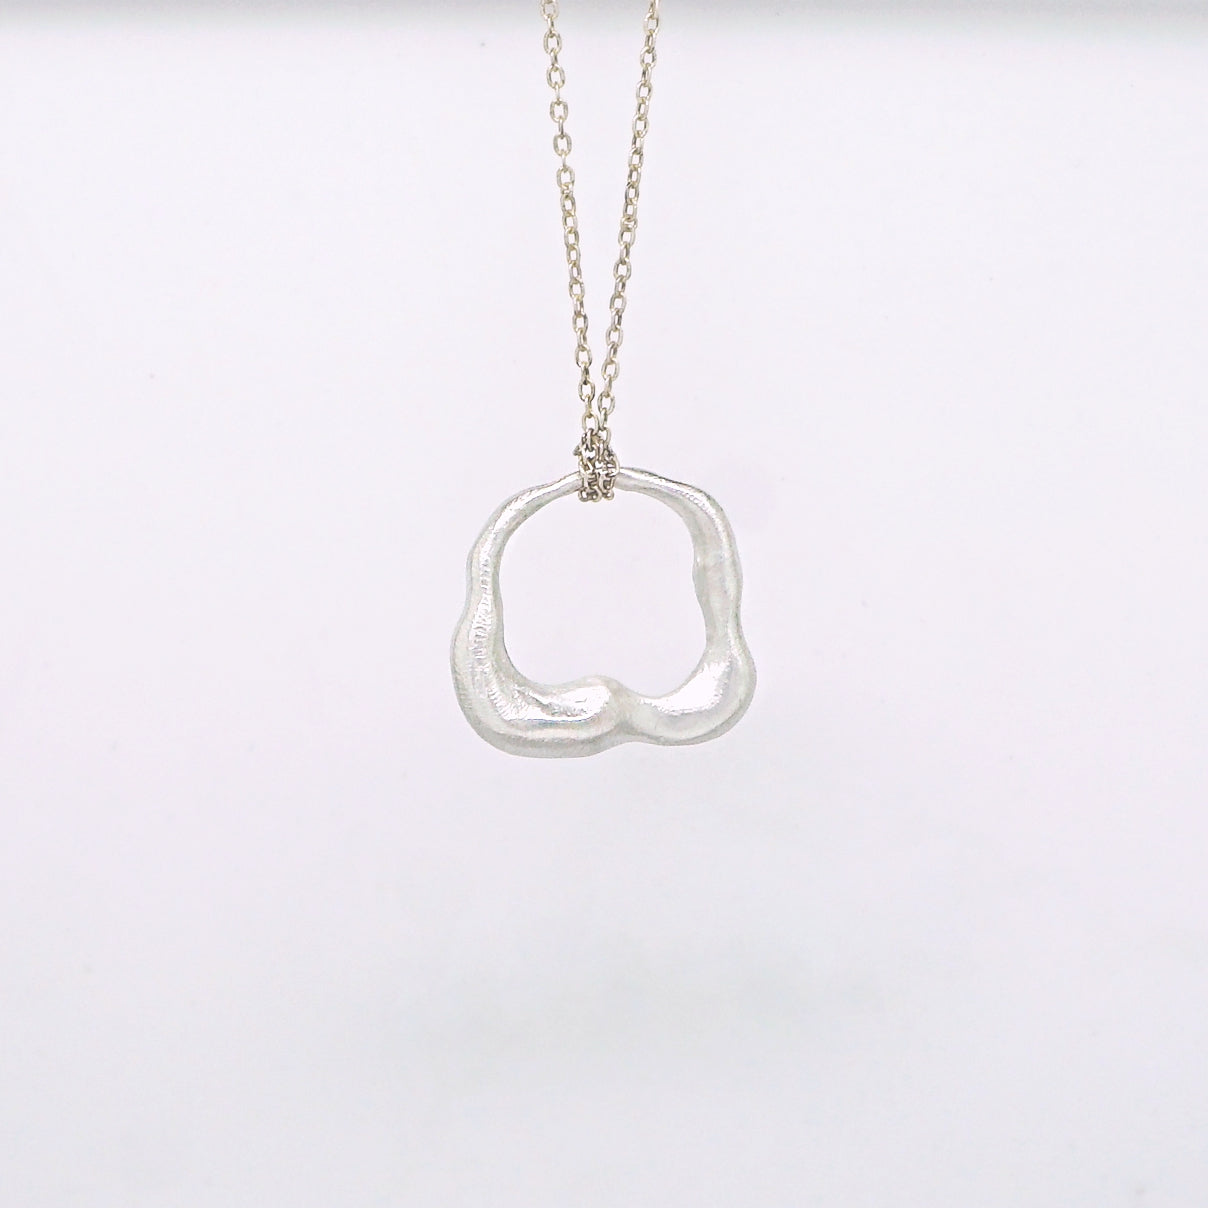 Abstract shape necklace